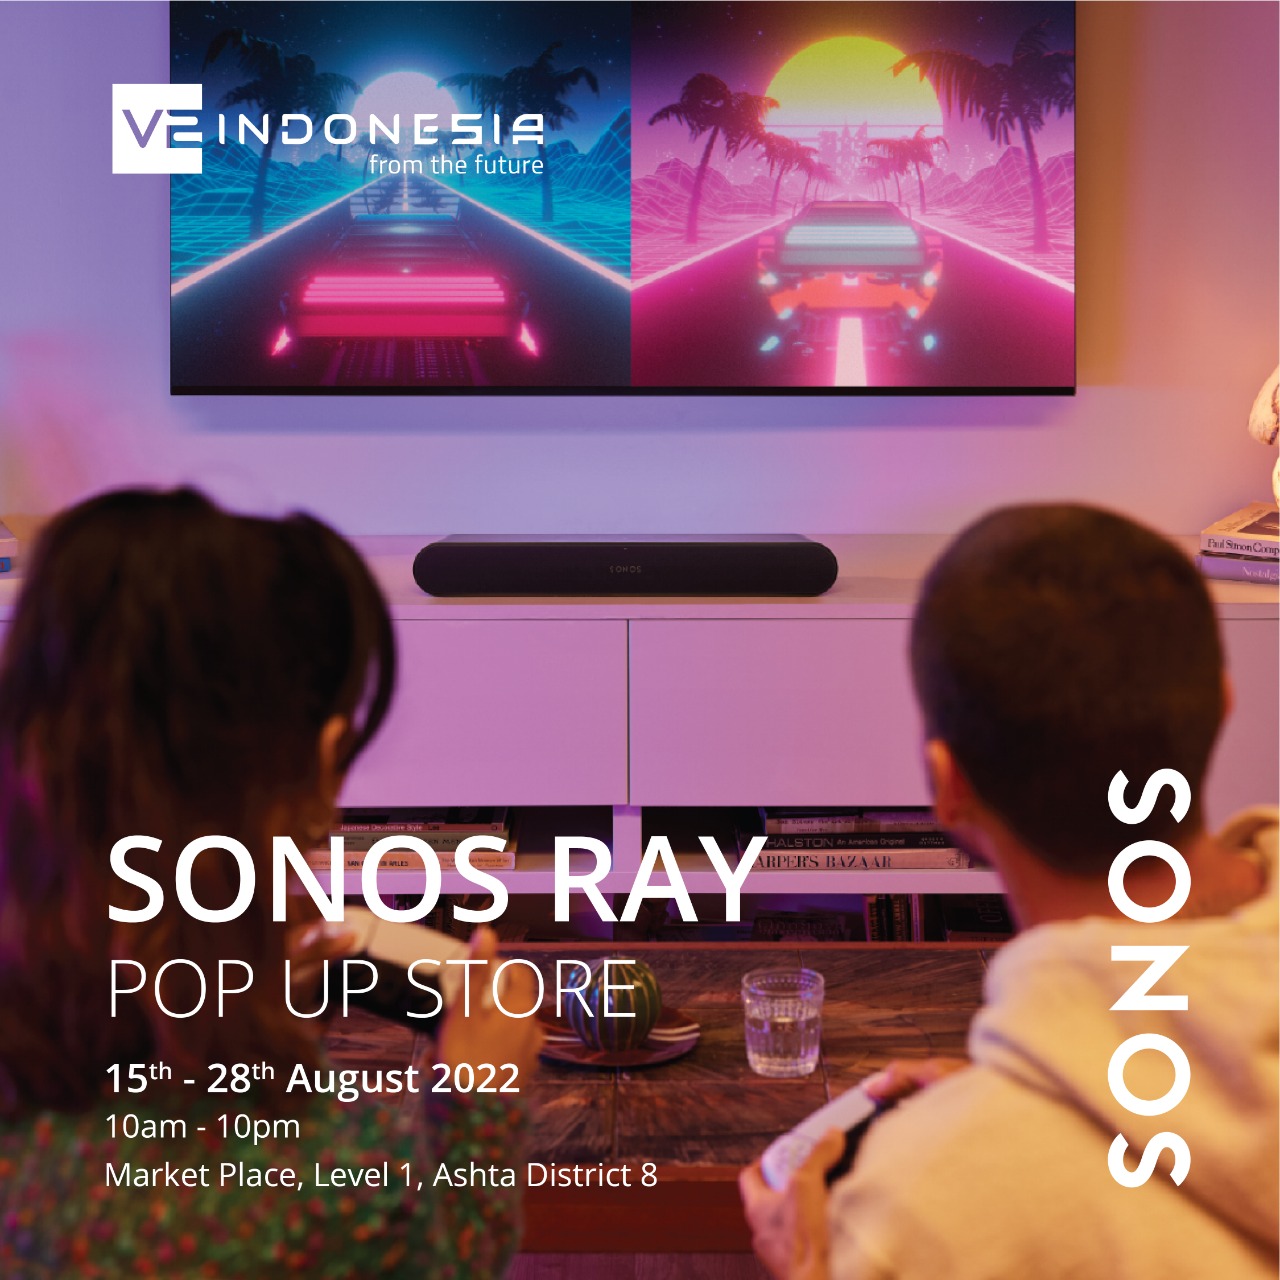 Sonos Ray Pop Up Store at Ashta District 8 Level 1